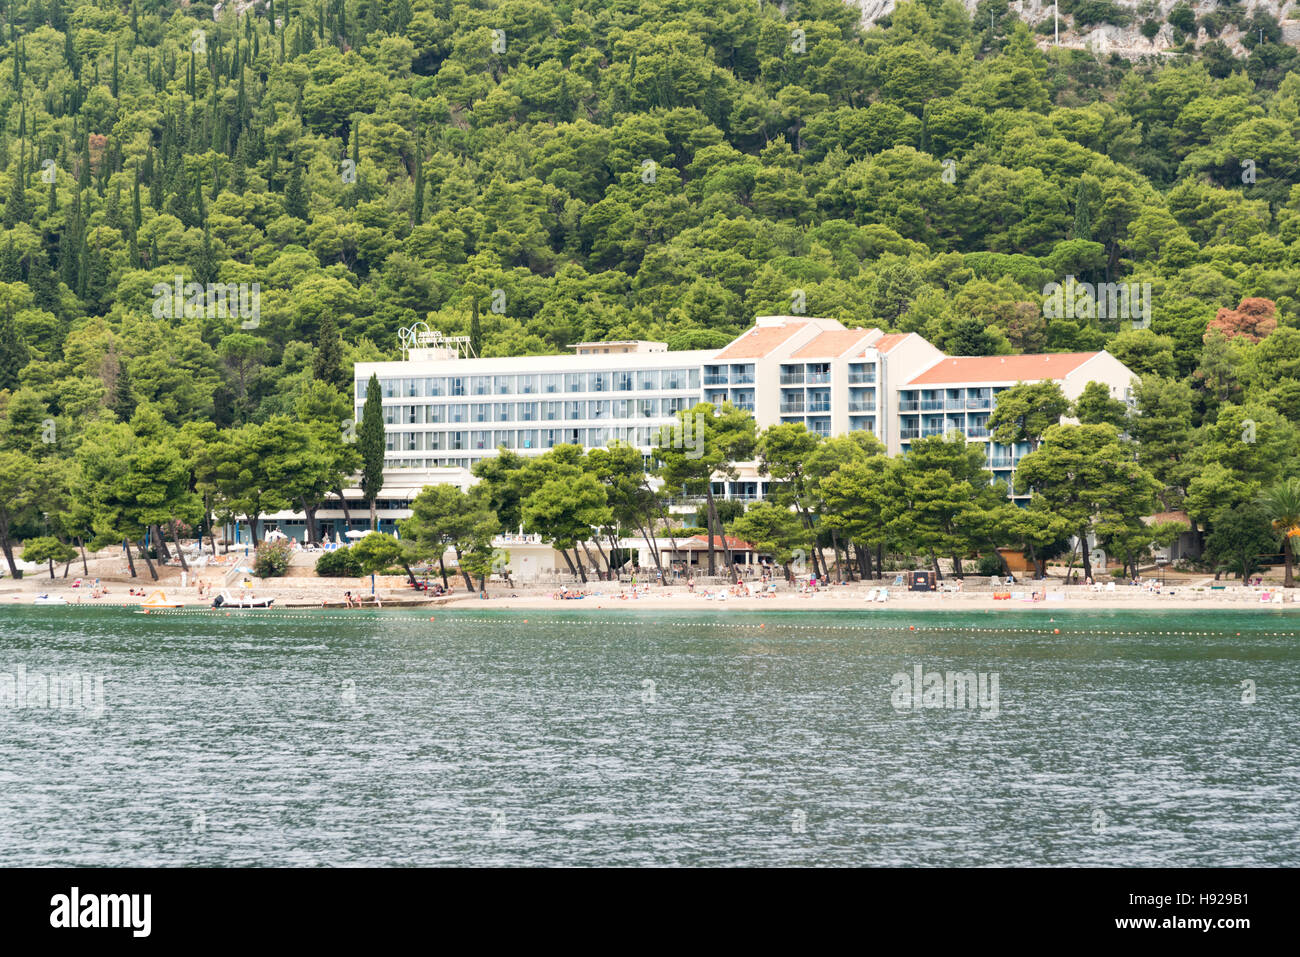 The Aminess Grand Azur hotel on the waterfront and beach at Orebic Croatia Stock Photo